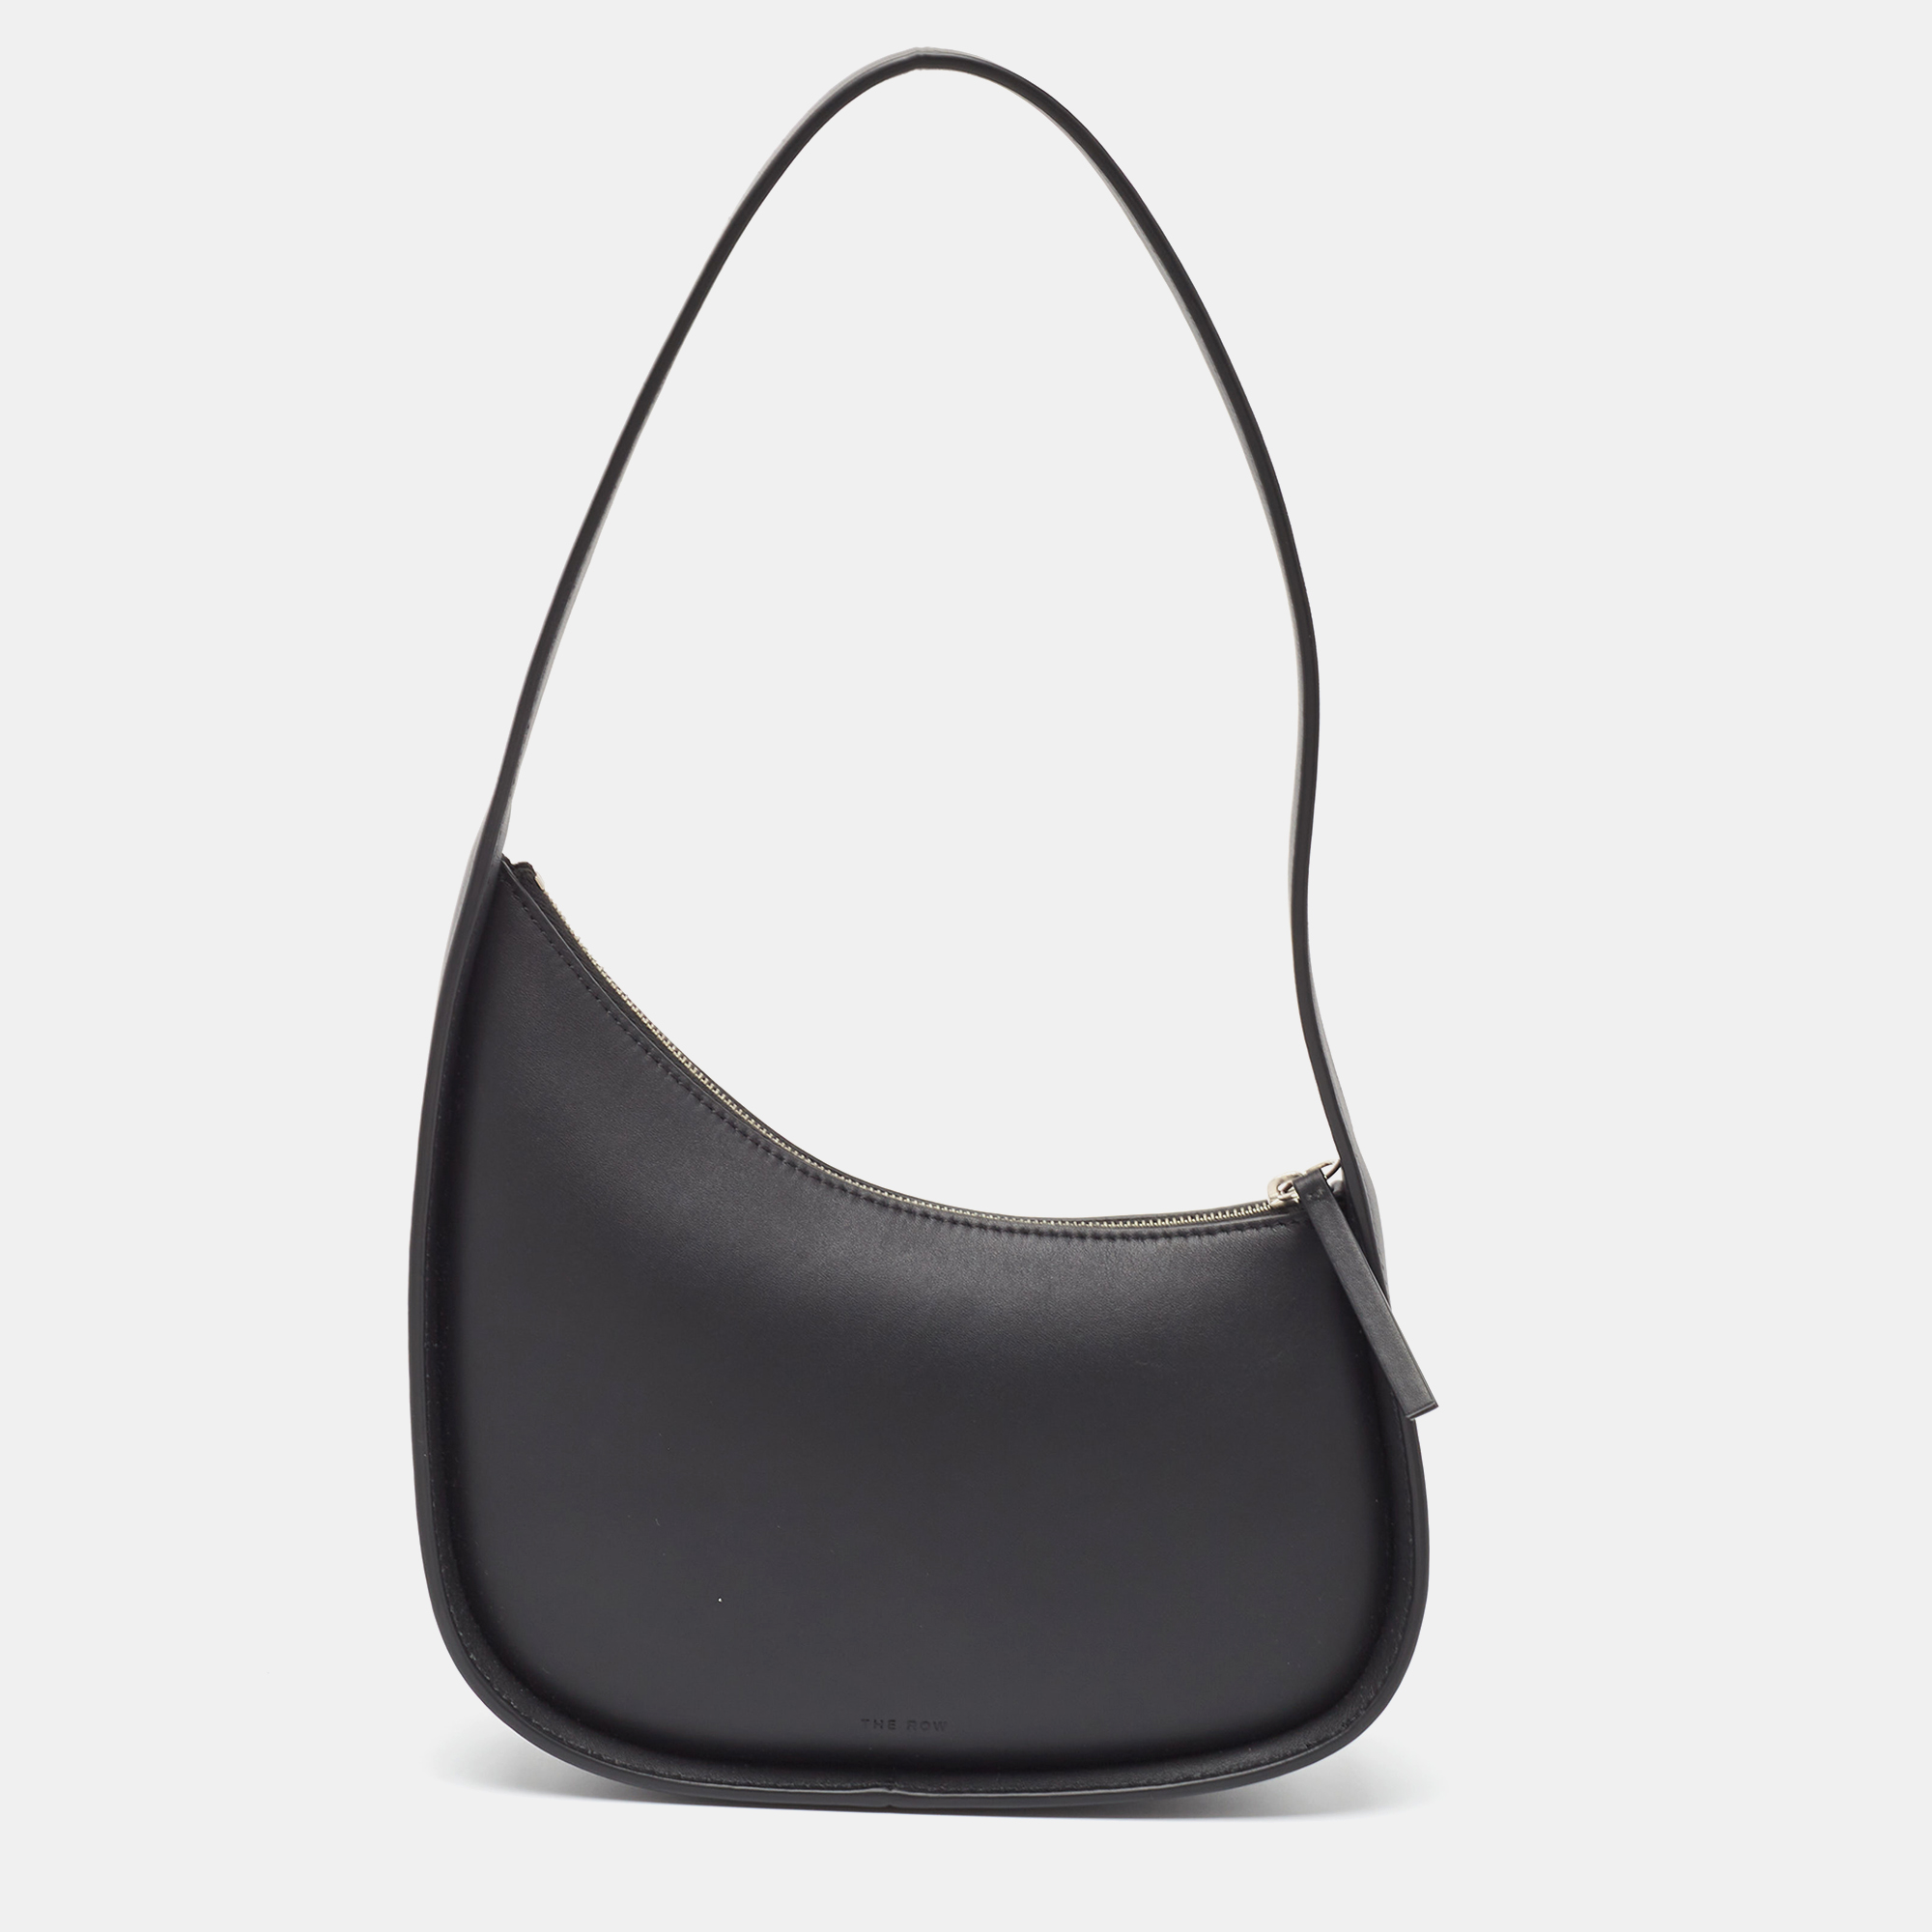 Crafted by The Row this exquisite Half Moon bag epitomizes timeless style. Luxuriously smooth leather envelops its sleek half moon silhouette while a delicate shoulder strap ensures effortless elegance. Practical yet undeniably chic its the perfect accessory for any discerning fashion connoisseur.